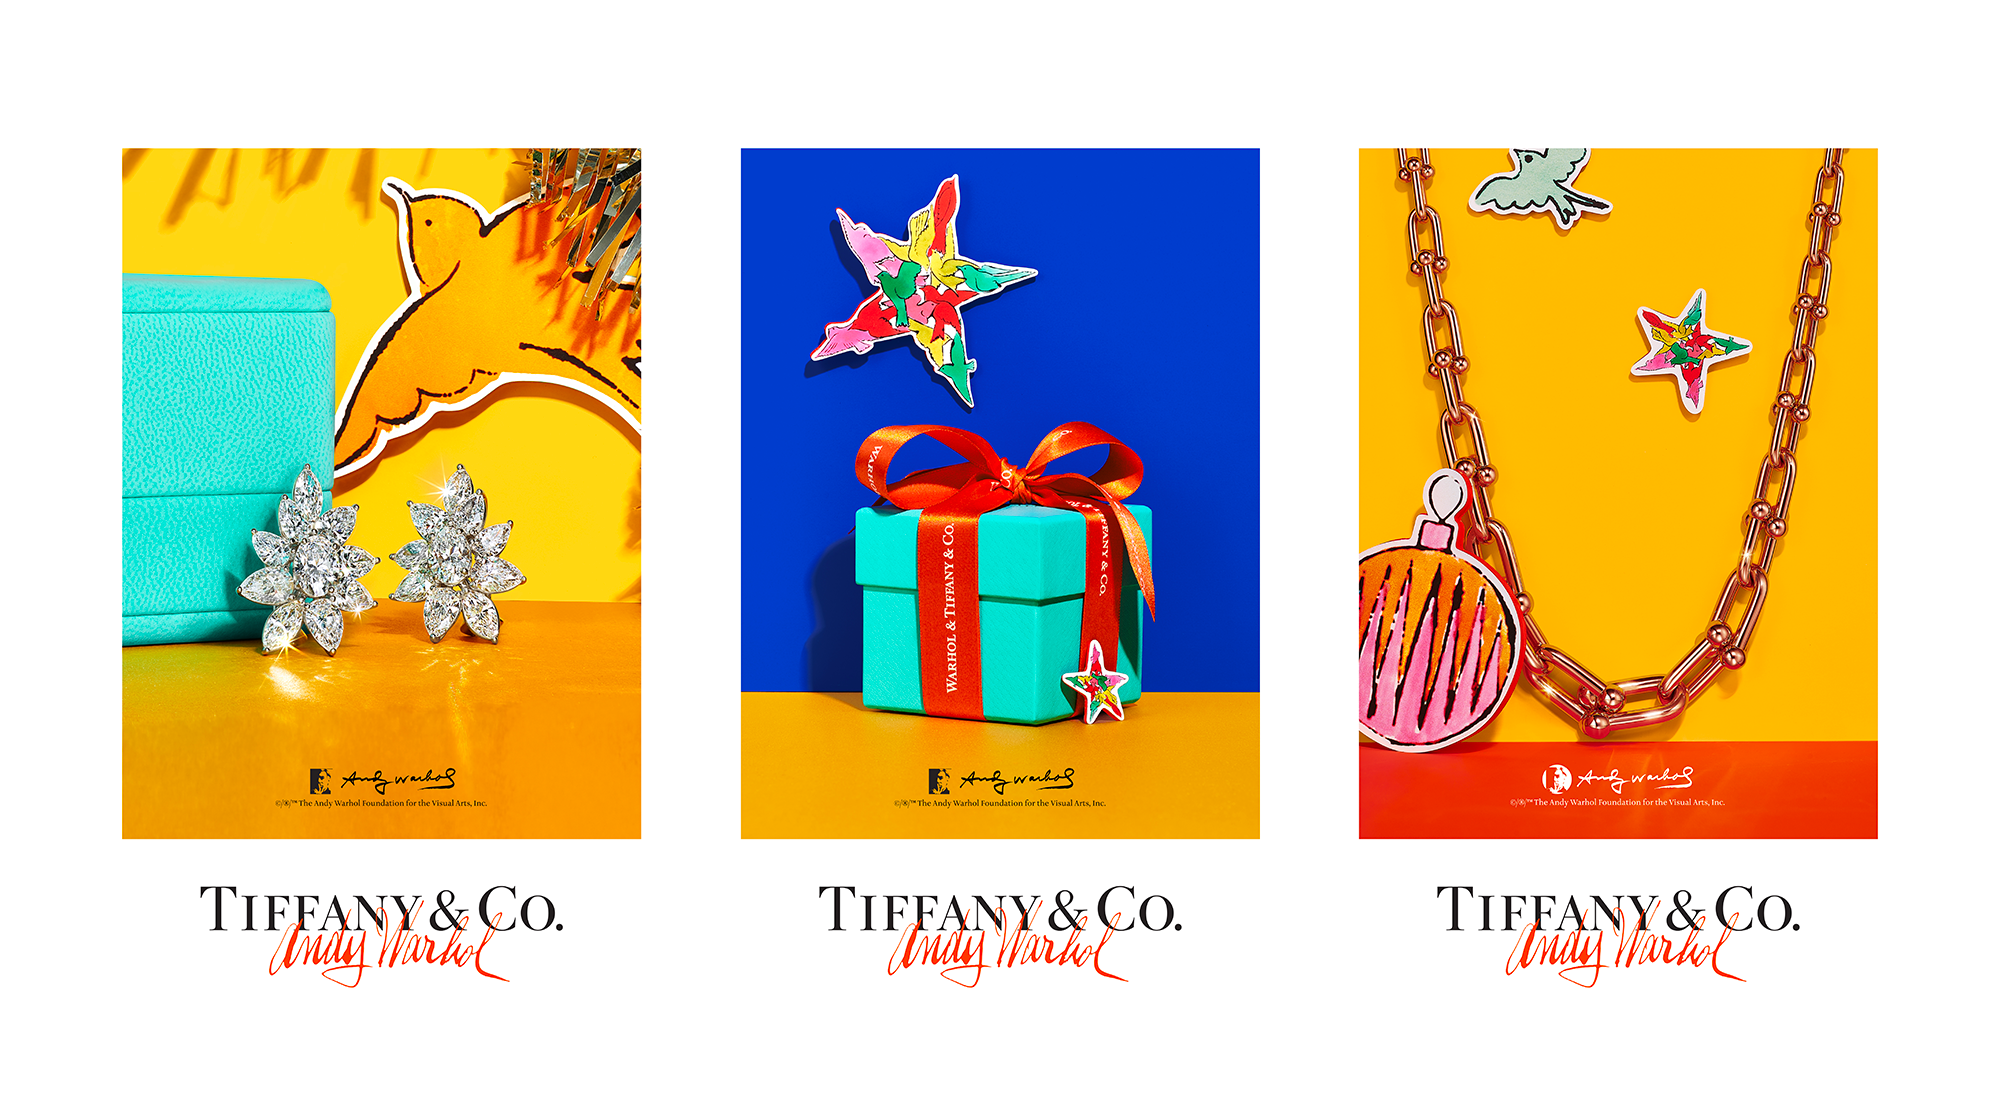 Tiffany & Co. pays homage to Andy Warhol for holiday season - LVMH